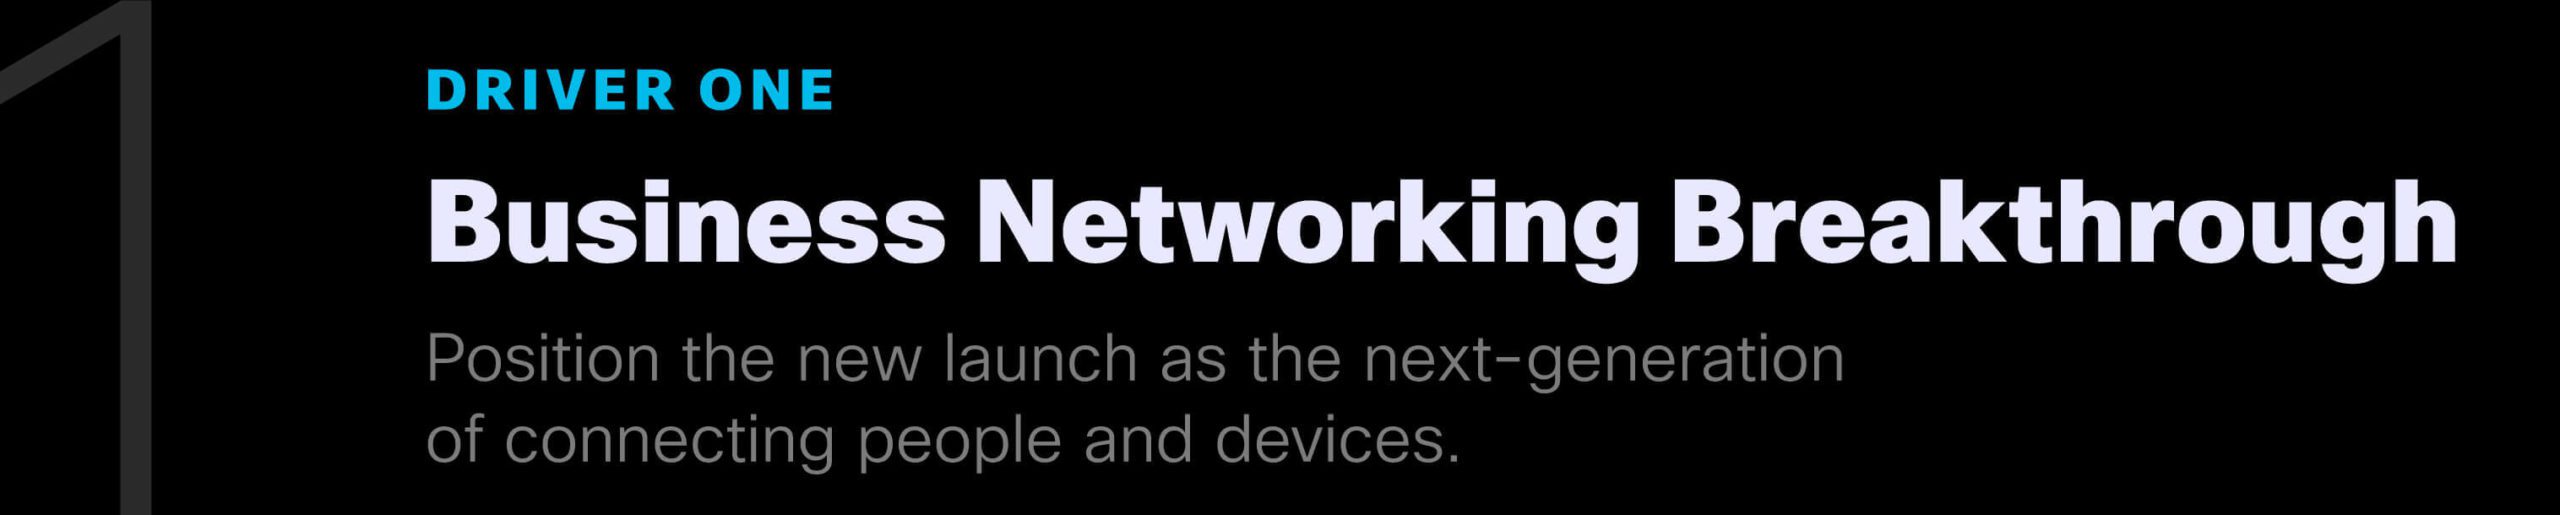 Driver One: Business Networking Breakthrough. Position the new launch as the next-generation of connecting people and devices.